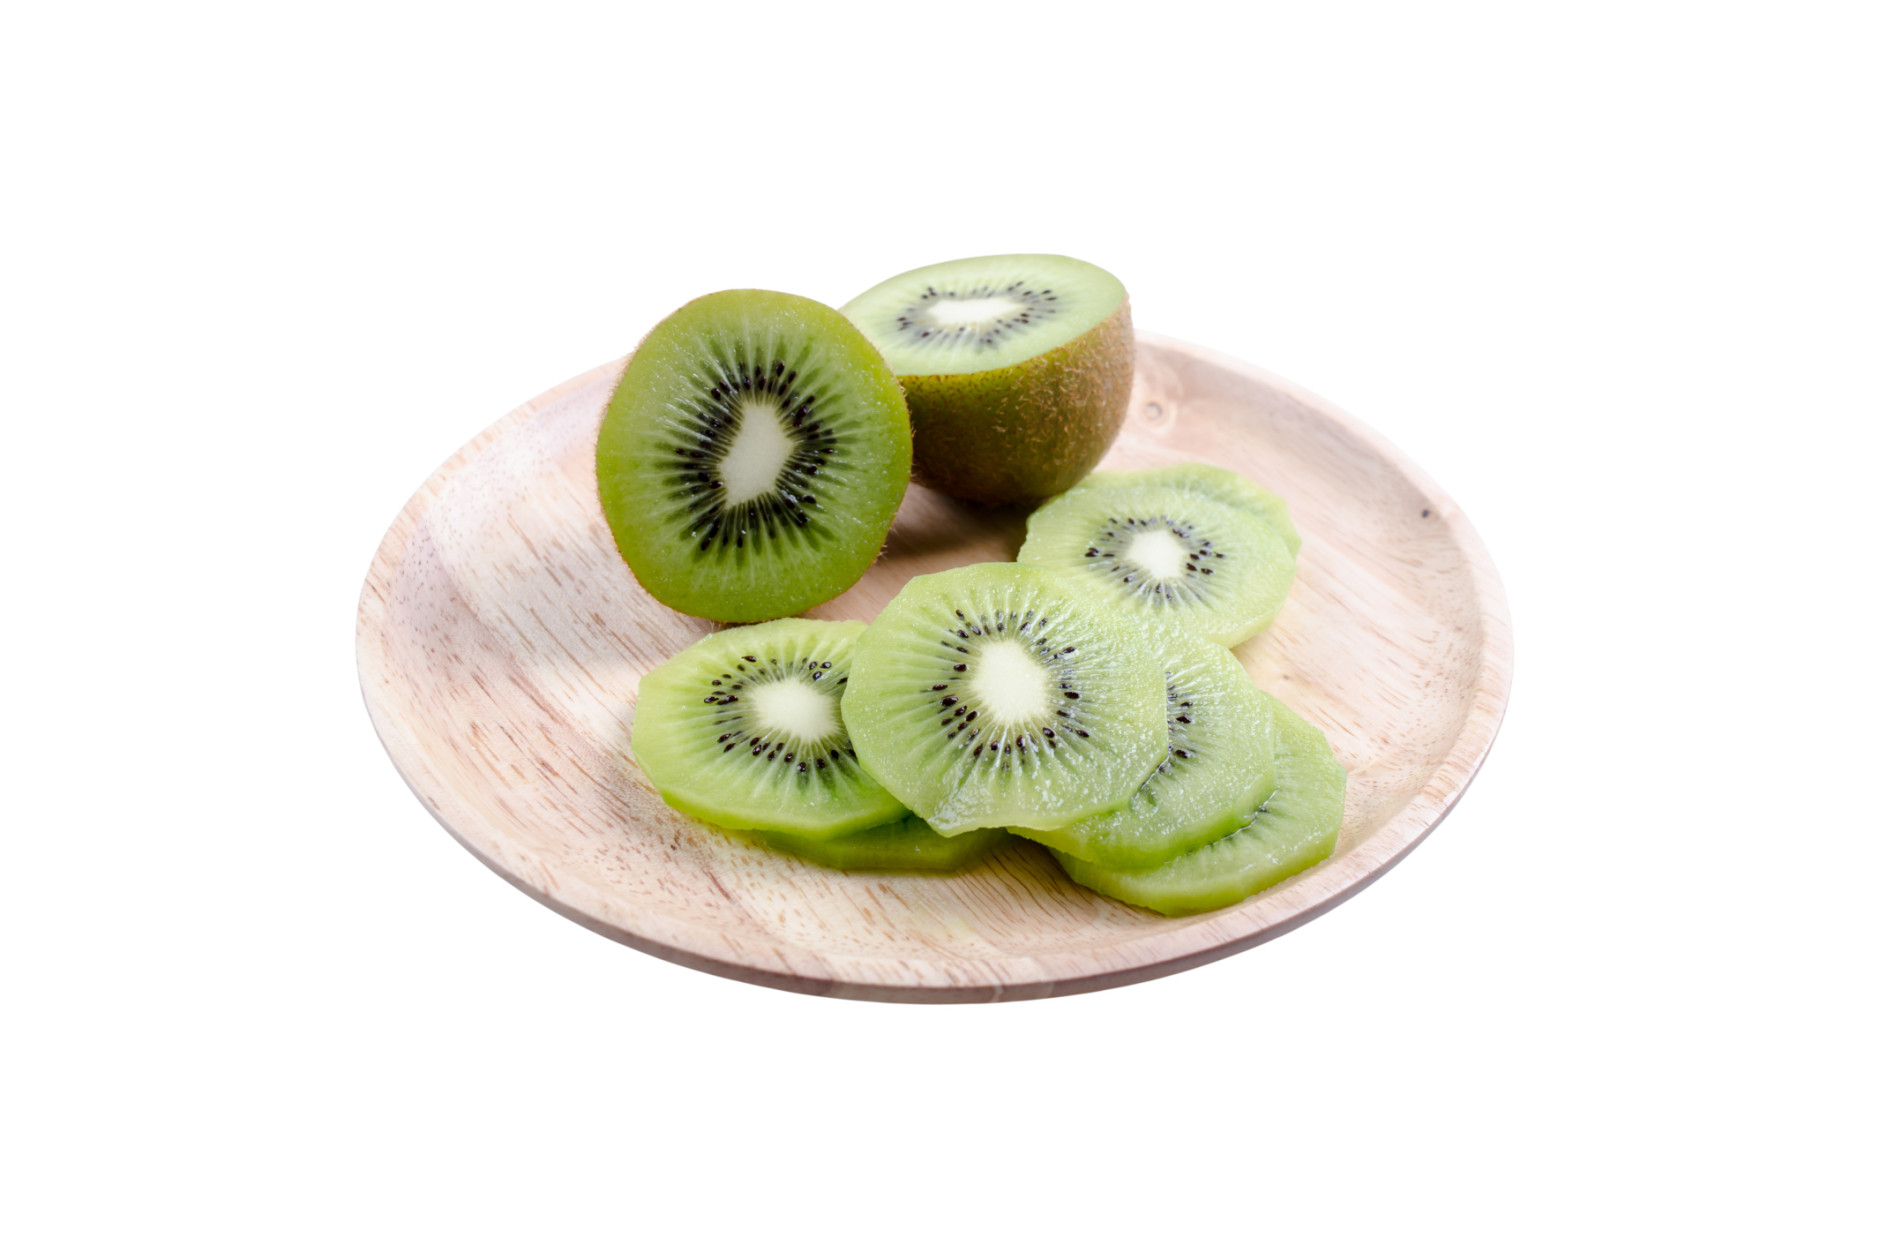 It may be questionably small, brown and hairy, but kiwifruit is full of surprises once you get through the skin to enjoy the taste and health benefits of the delicious flesh. (Thinkstock) 